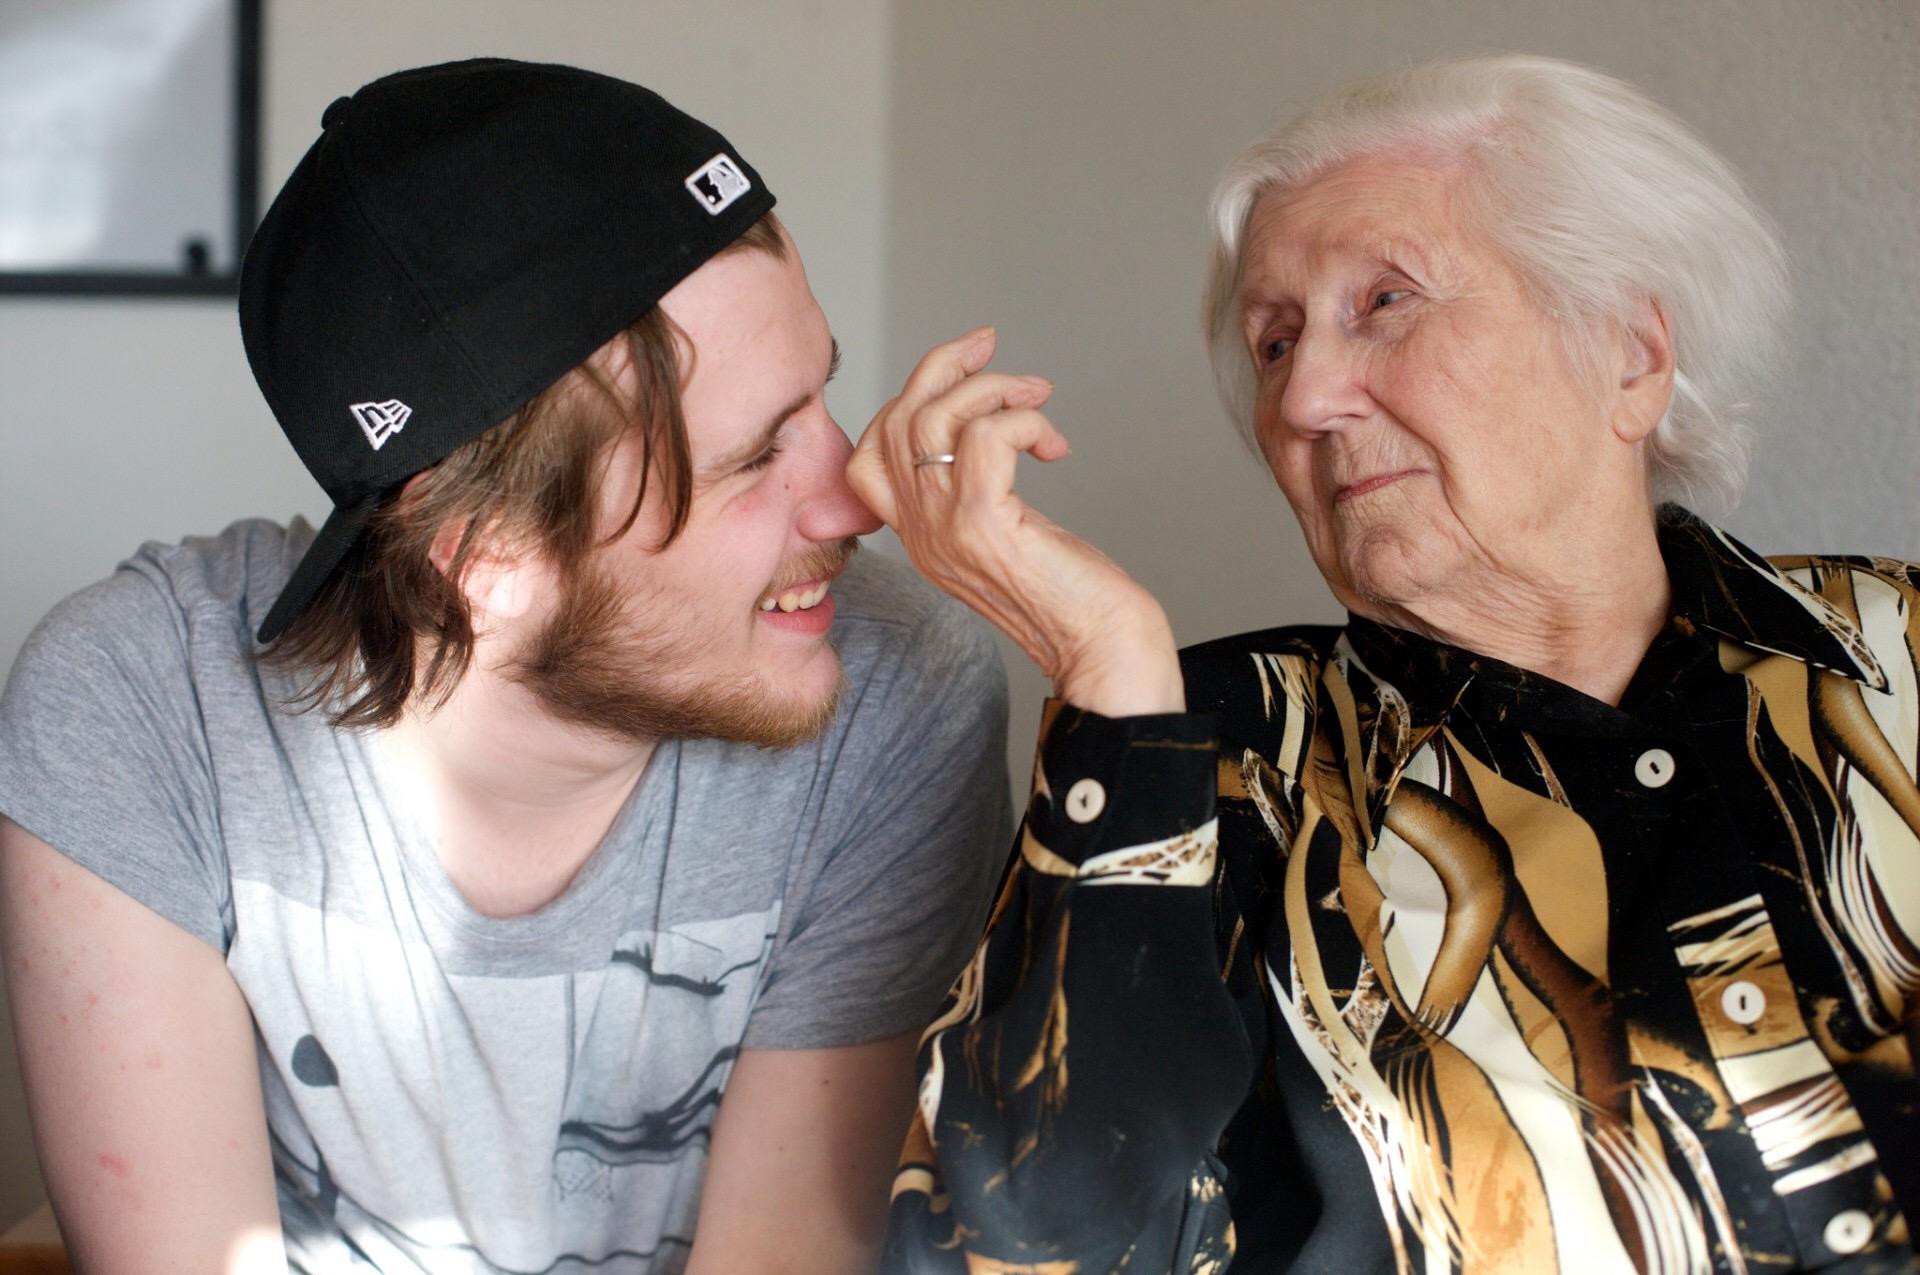 Dutch students are living in care homes for the elderly and everyone is loving it!